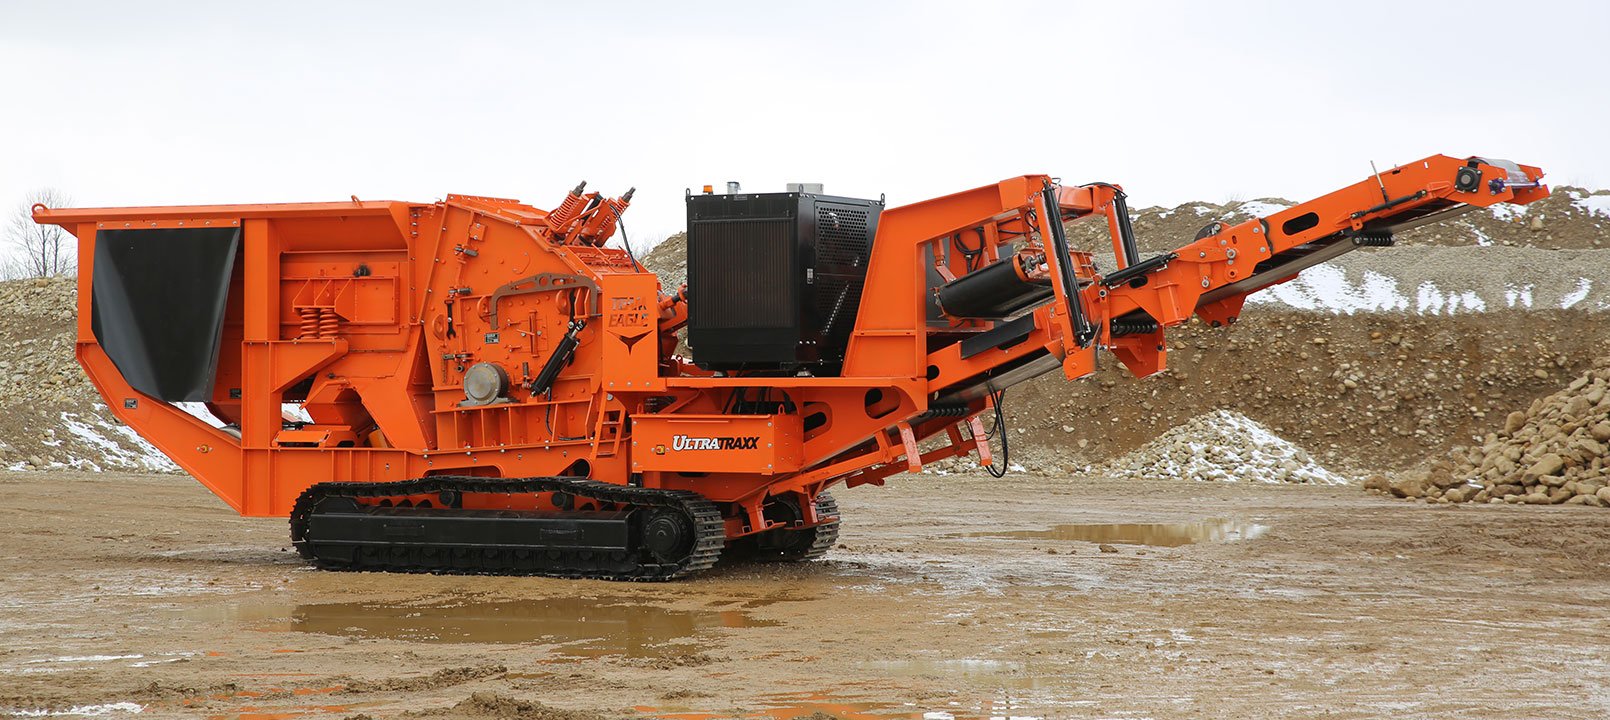 Mobile or Portable Crushers: Buying the Right Plant for the Job